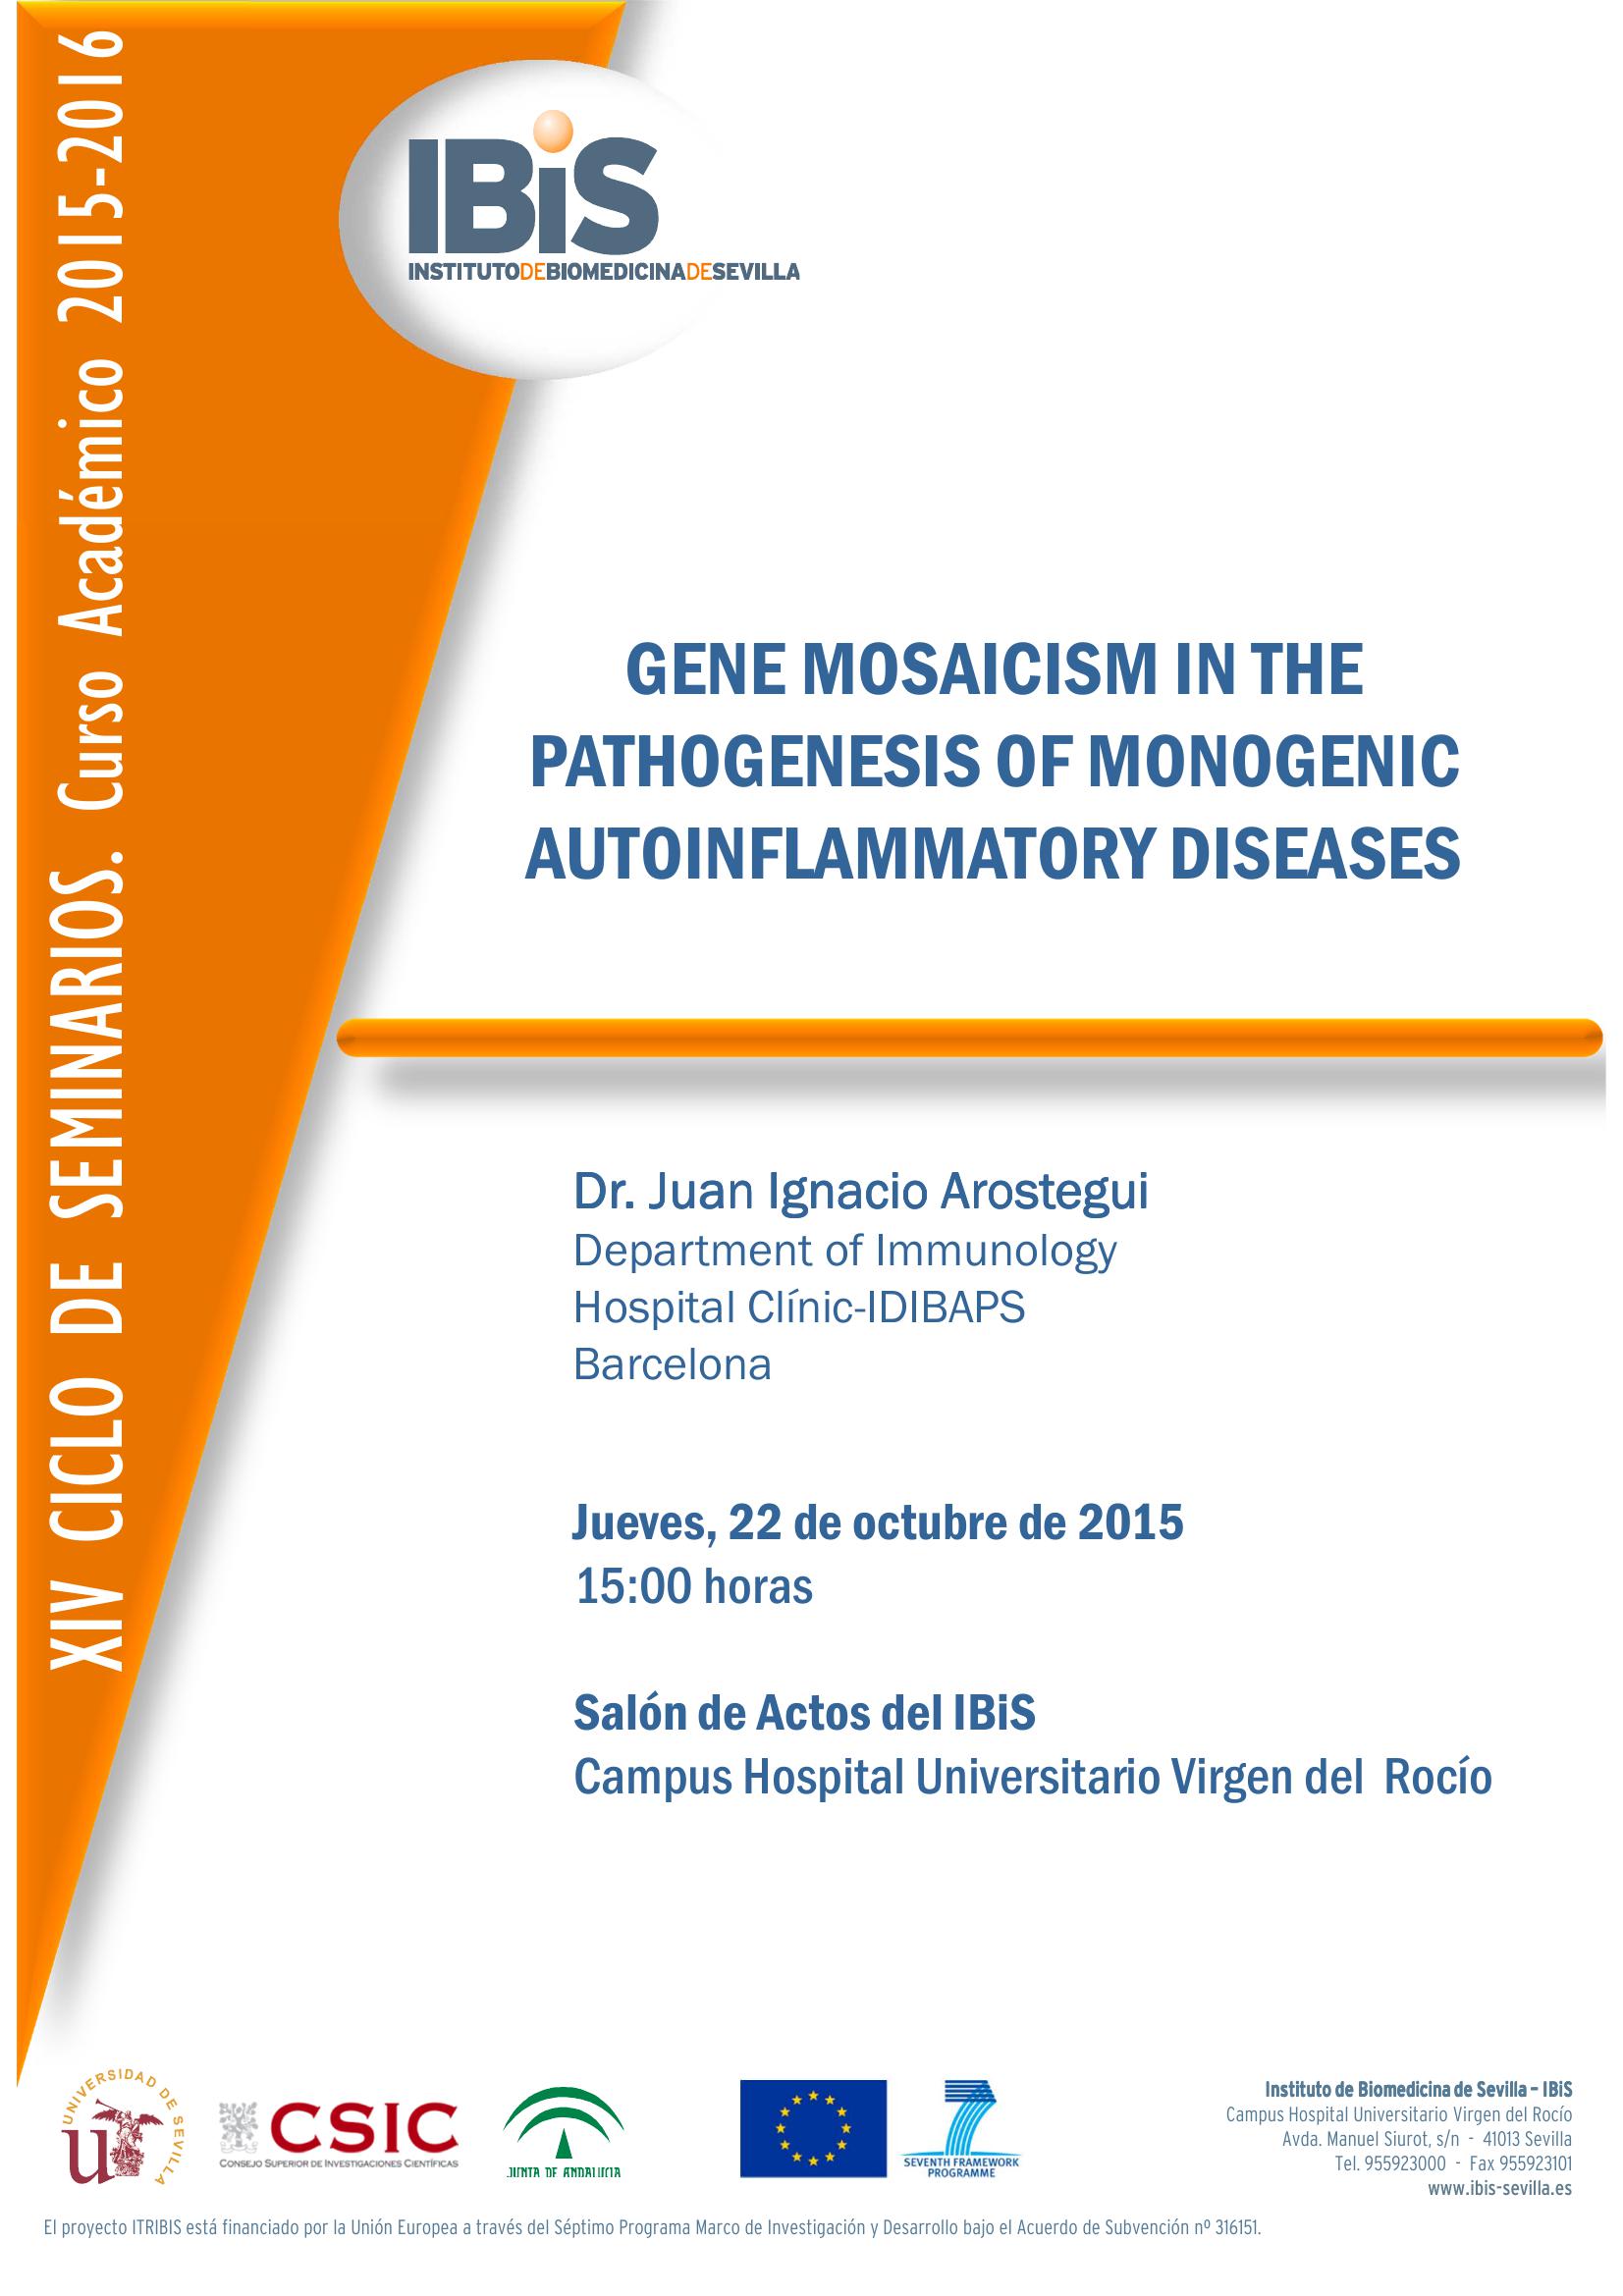 Poster: GENE MOSAICISM IN THE PATHOGENESIS OF MONOGENIC AUTOINFLAMMATORY DISEASES